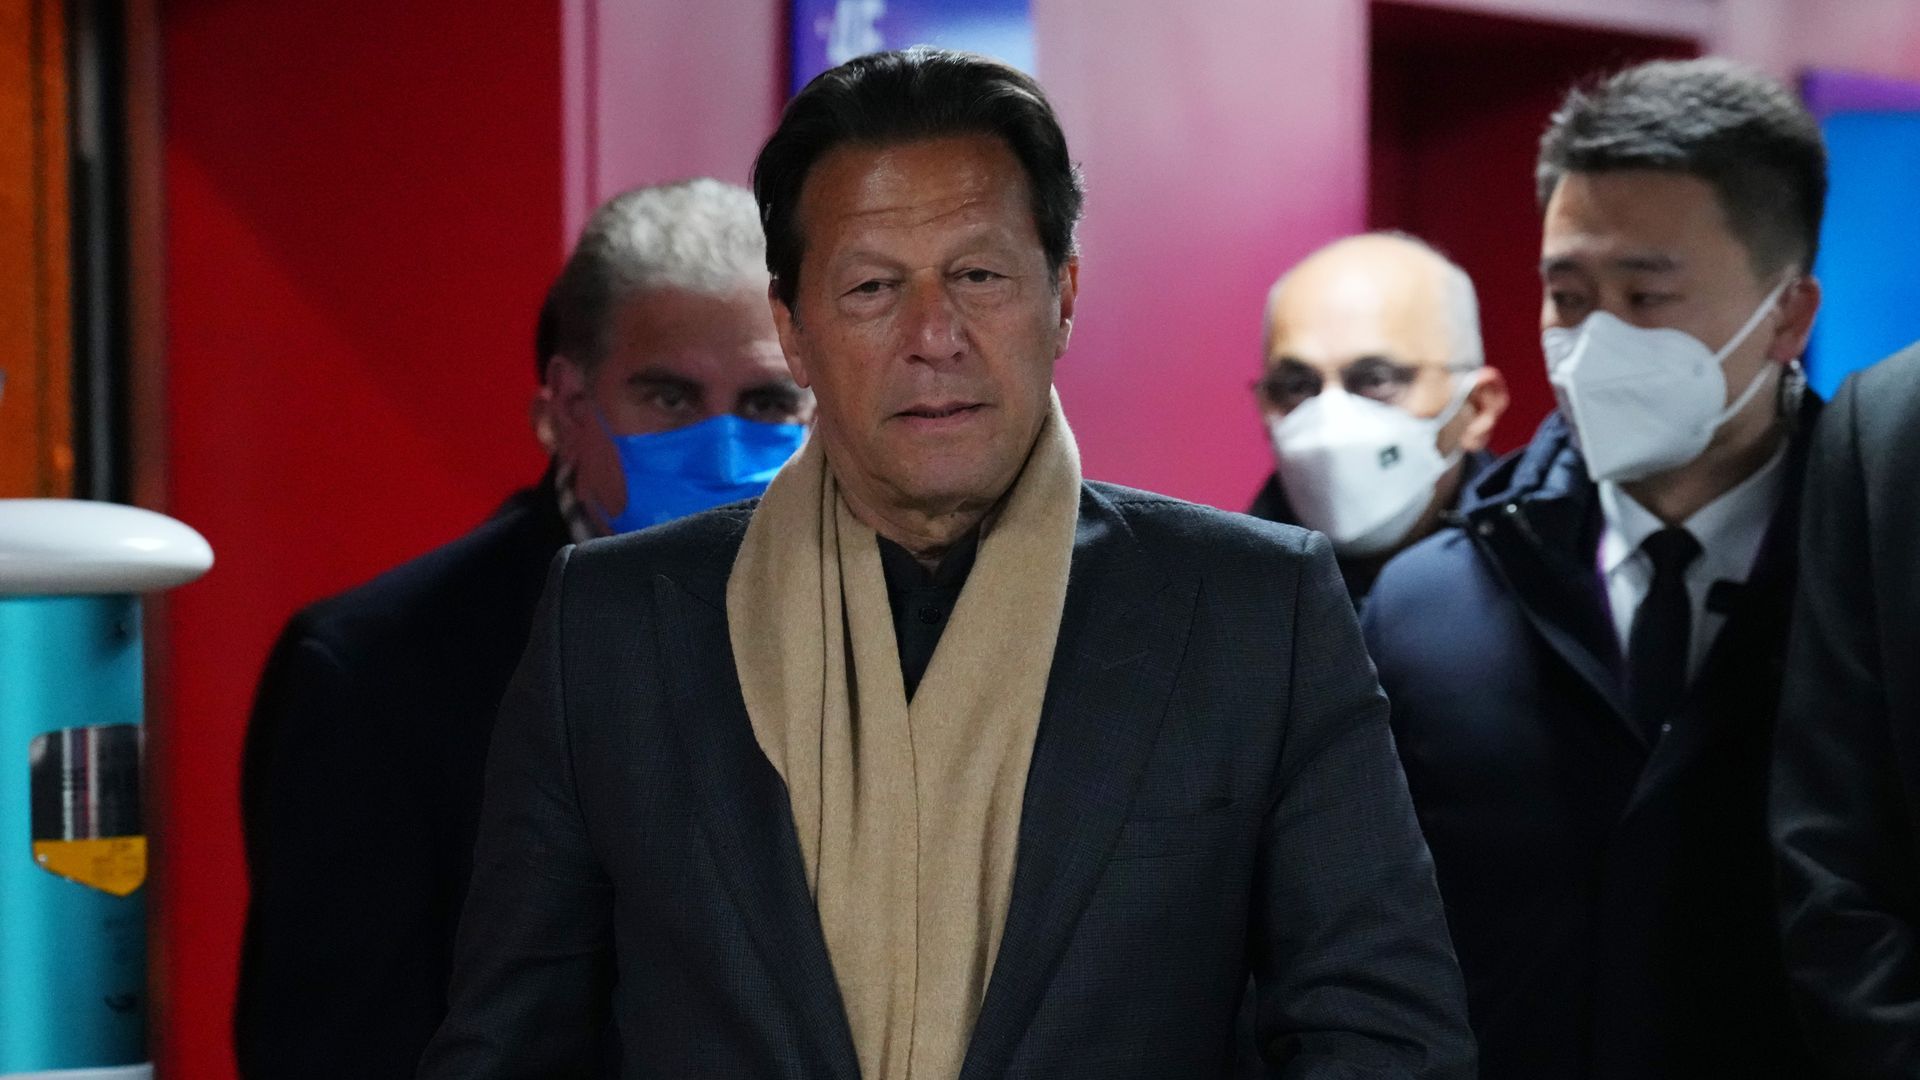 Then-Pakistan Prime Minister Imran Khan in Beijing in February. Photo: Carl Court/Getty Images